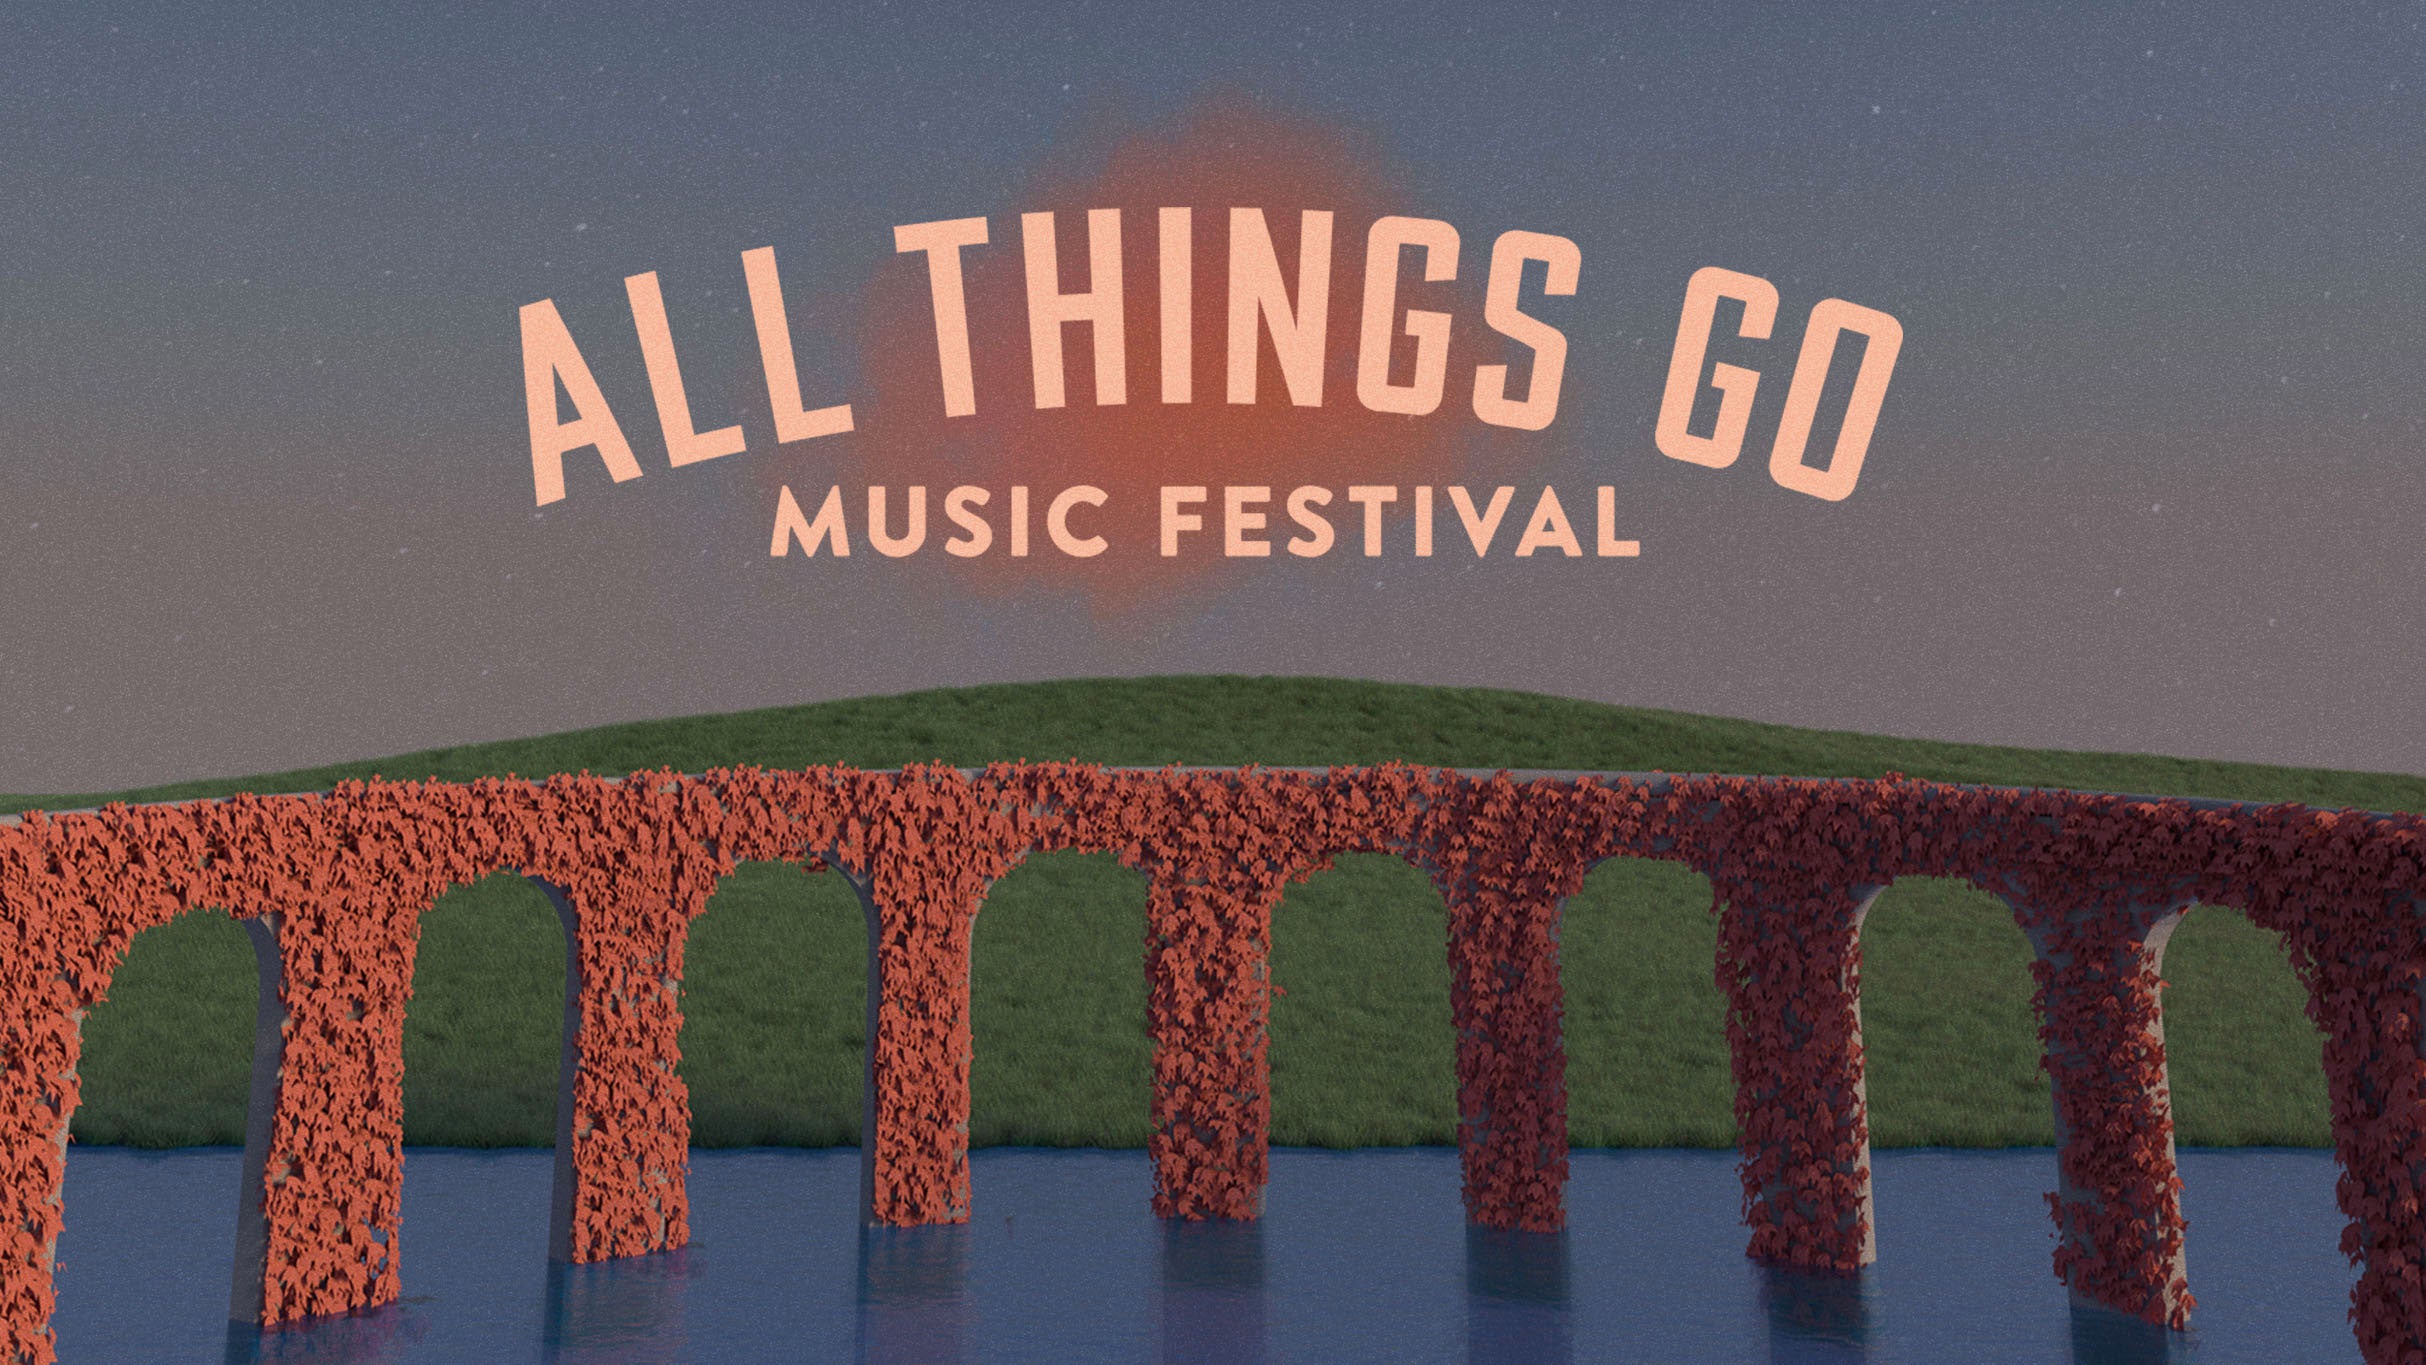 All Things Go Music Festival - Sunday presale code for early tickets in Columbia